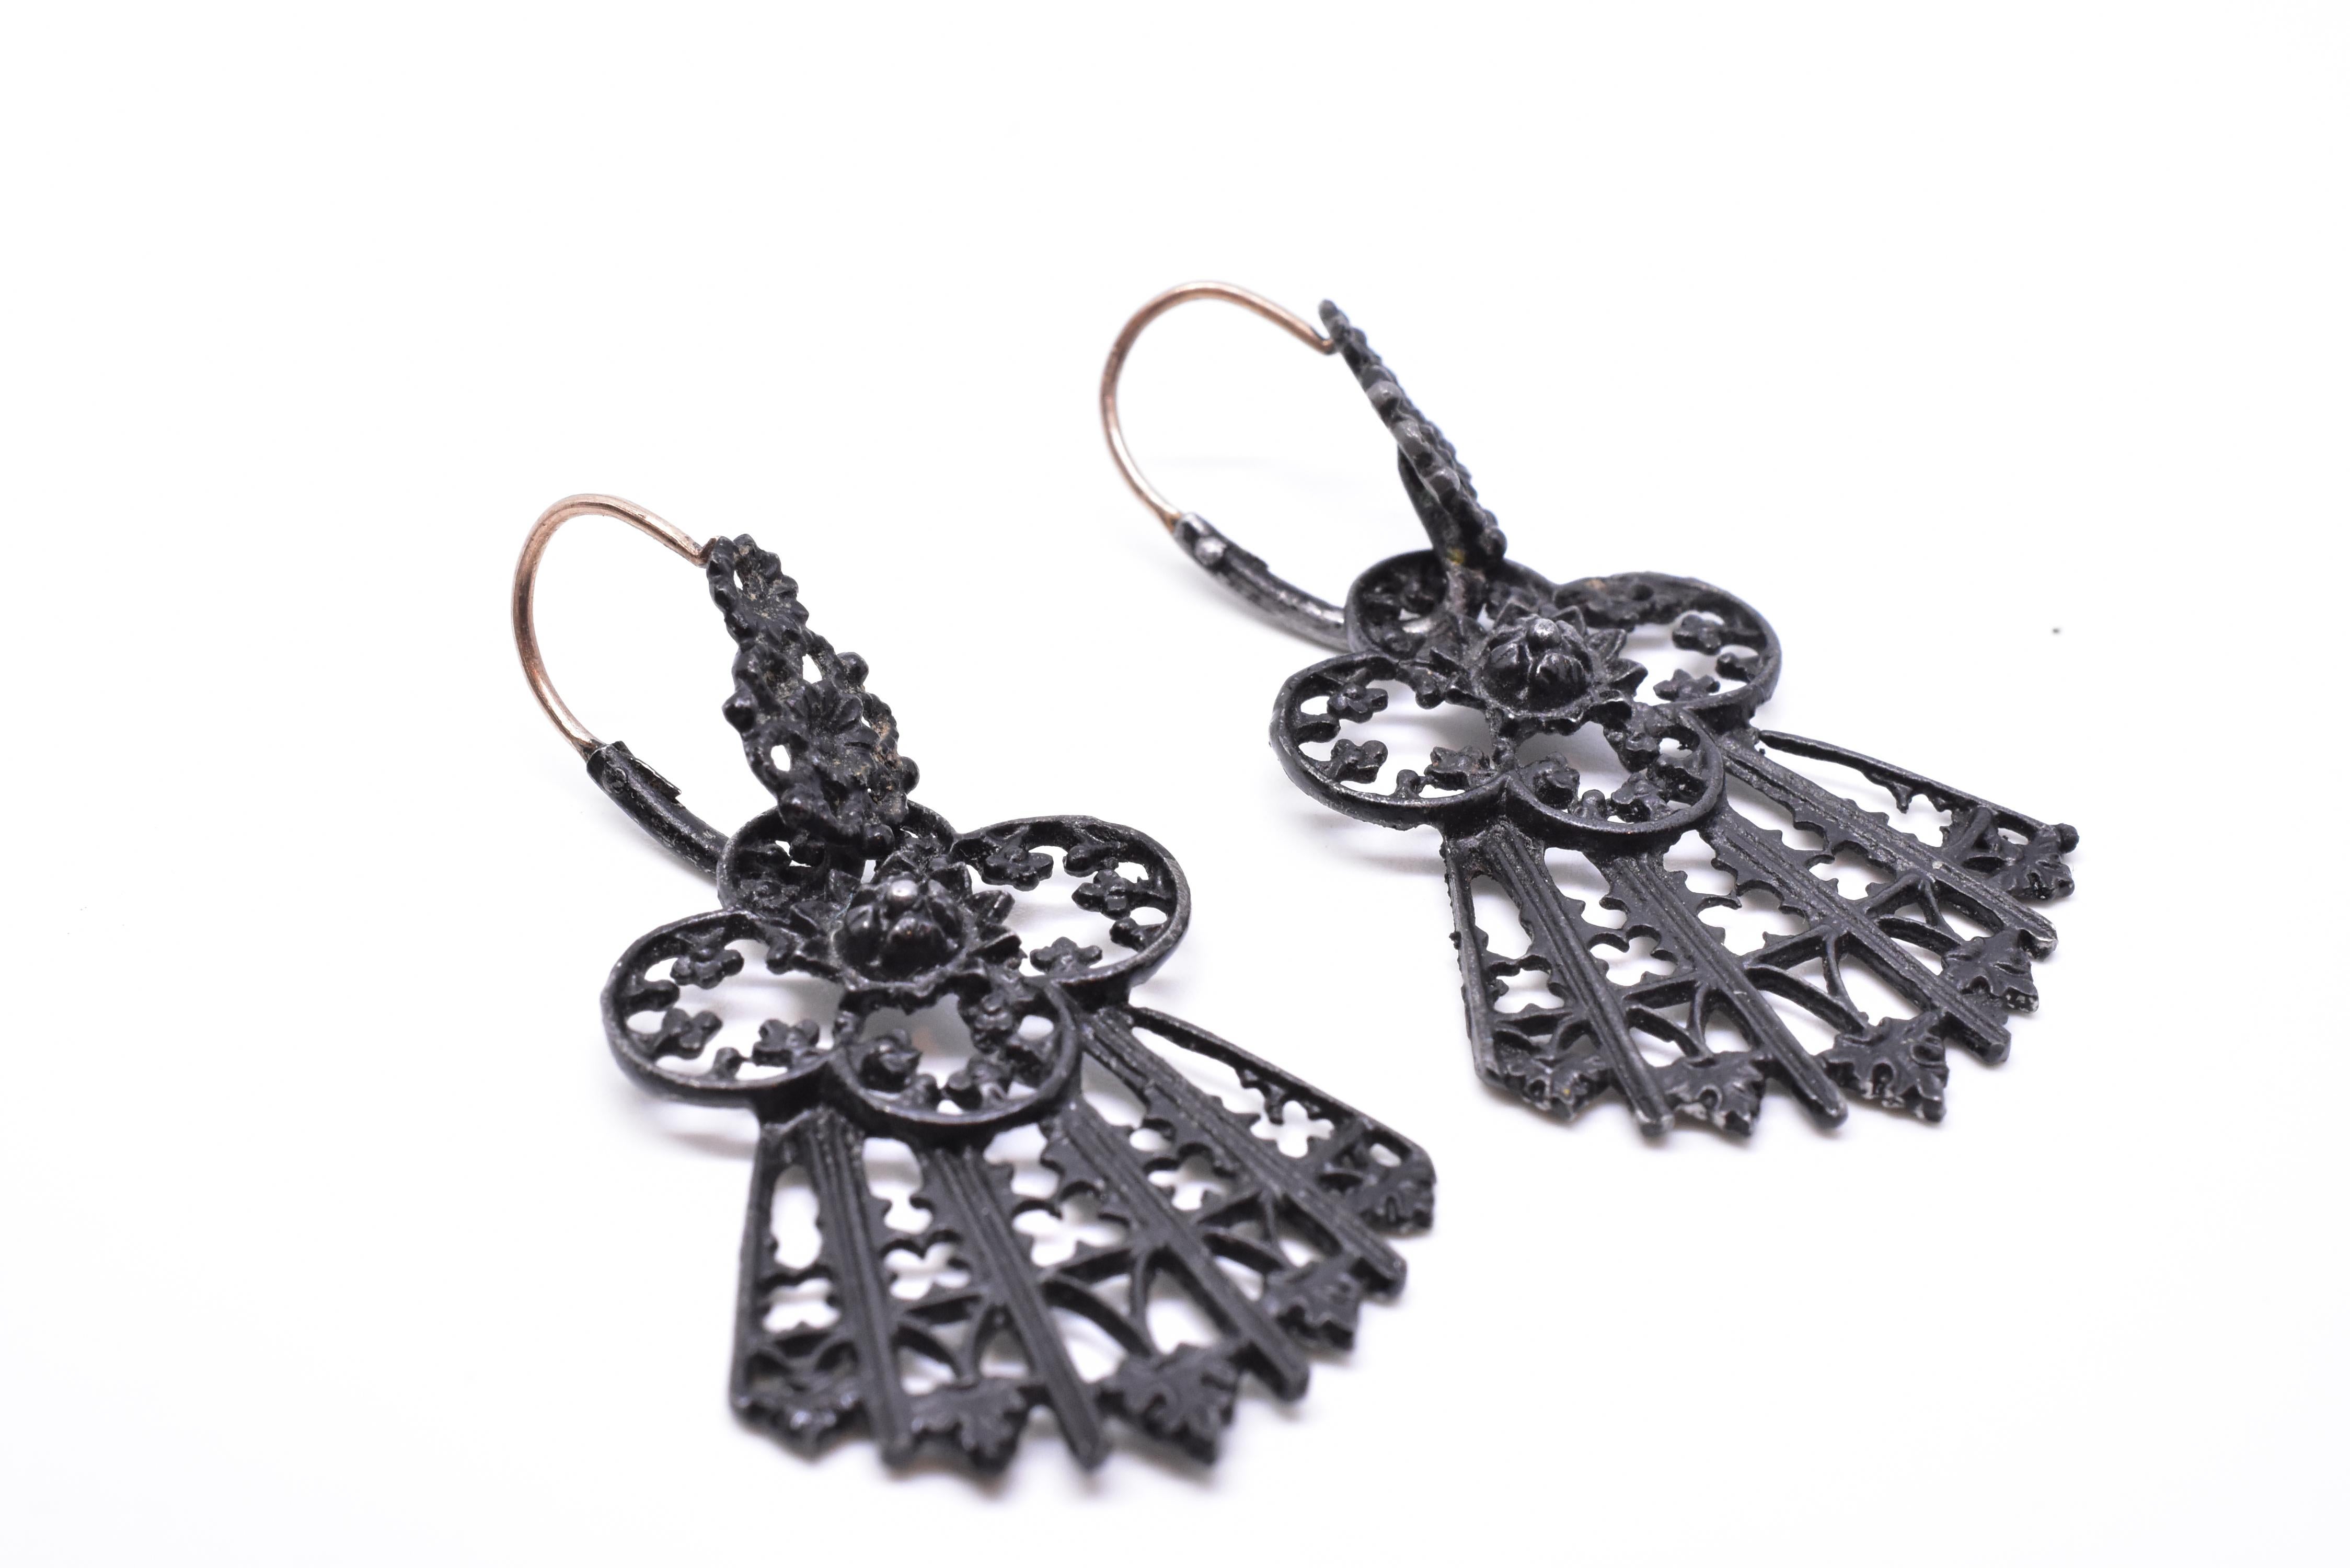 Our Berlin iron gothic revival earrings were made in the early part of the nineteenth century and are a wonderful example of historic jewelry.

Berlin Iron was first made between 1806-1812, around the time of the Napoleonic Wars, when wealthy